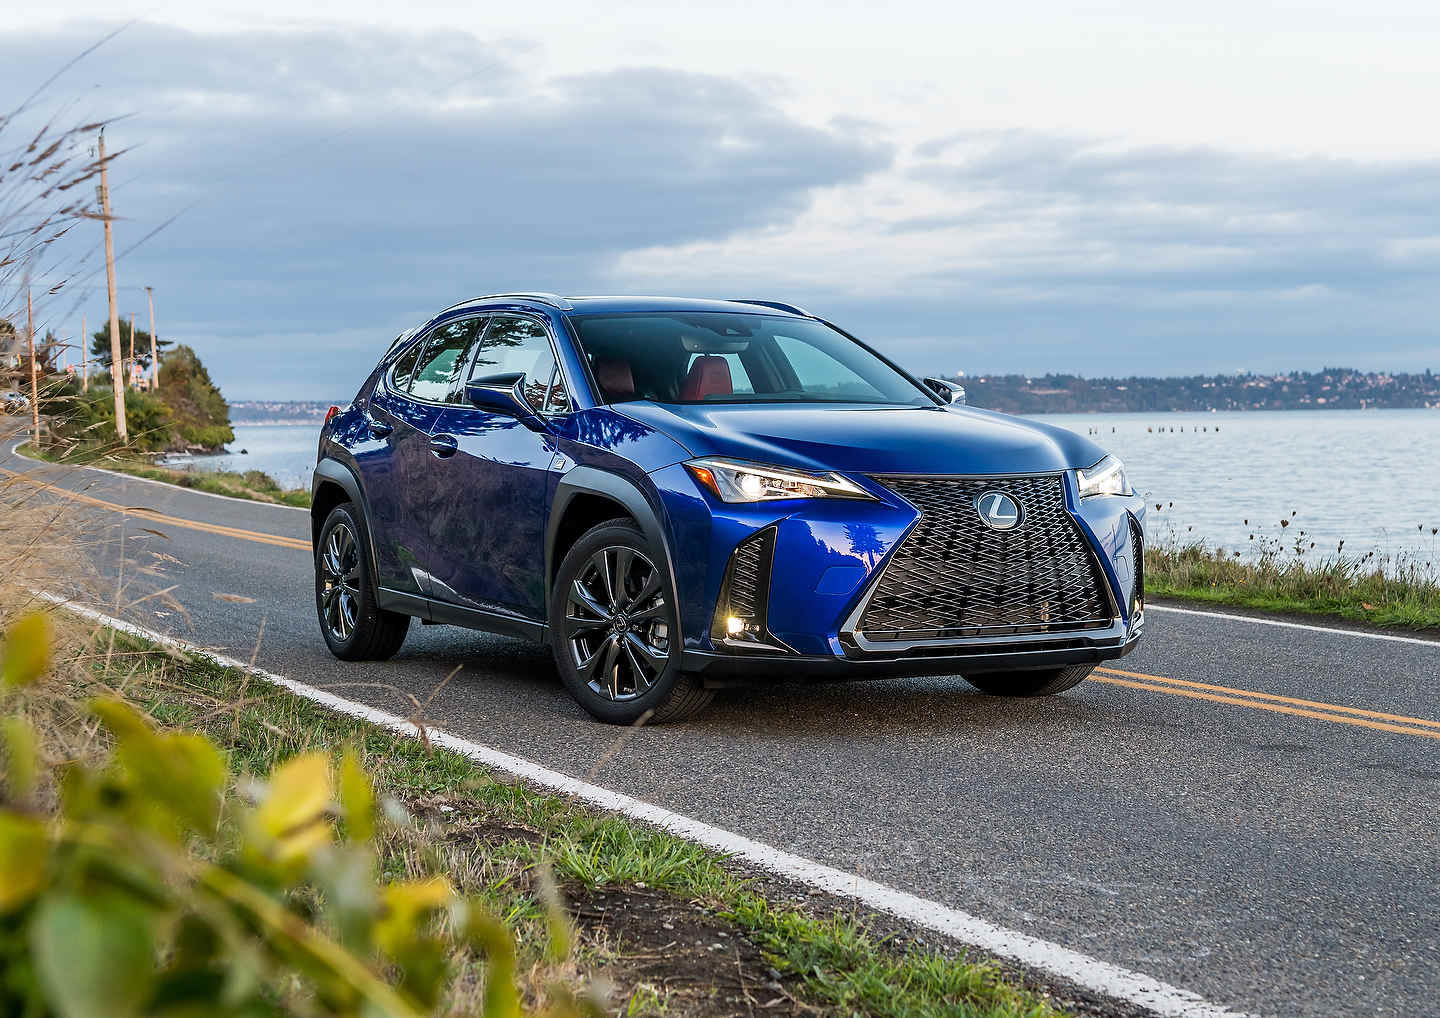 Why should you consider a used Lexus UX luxury SUV?